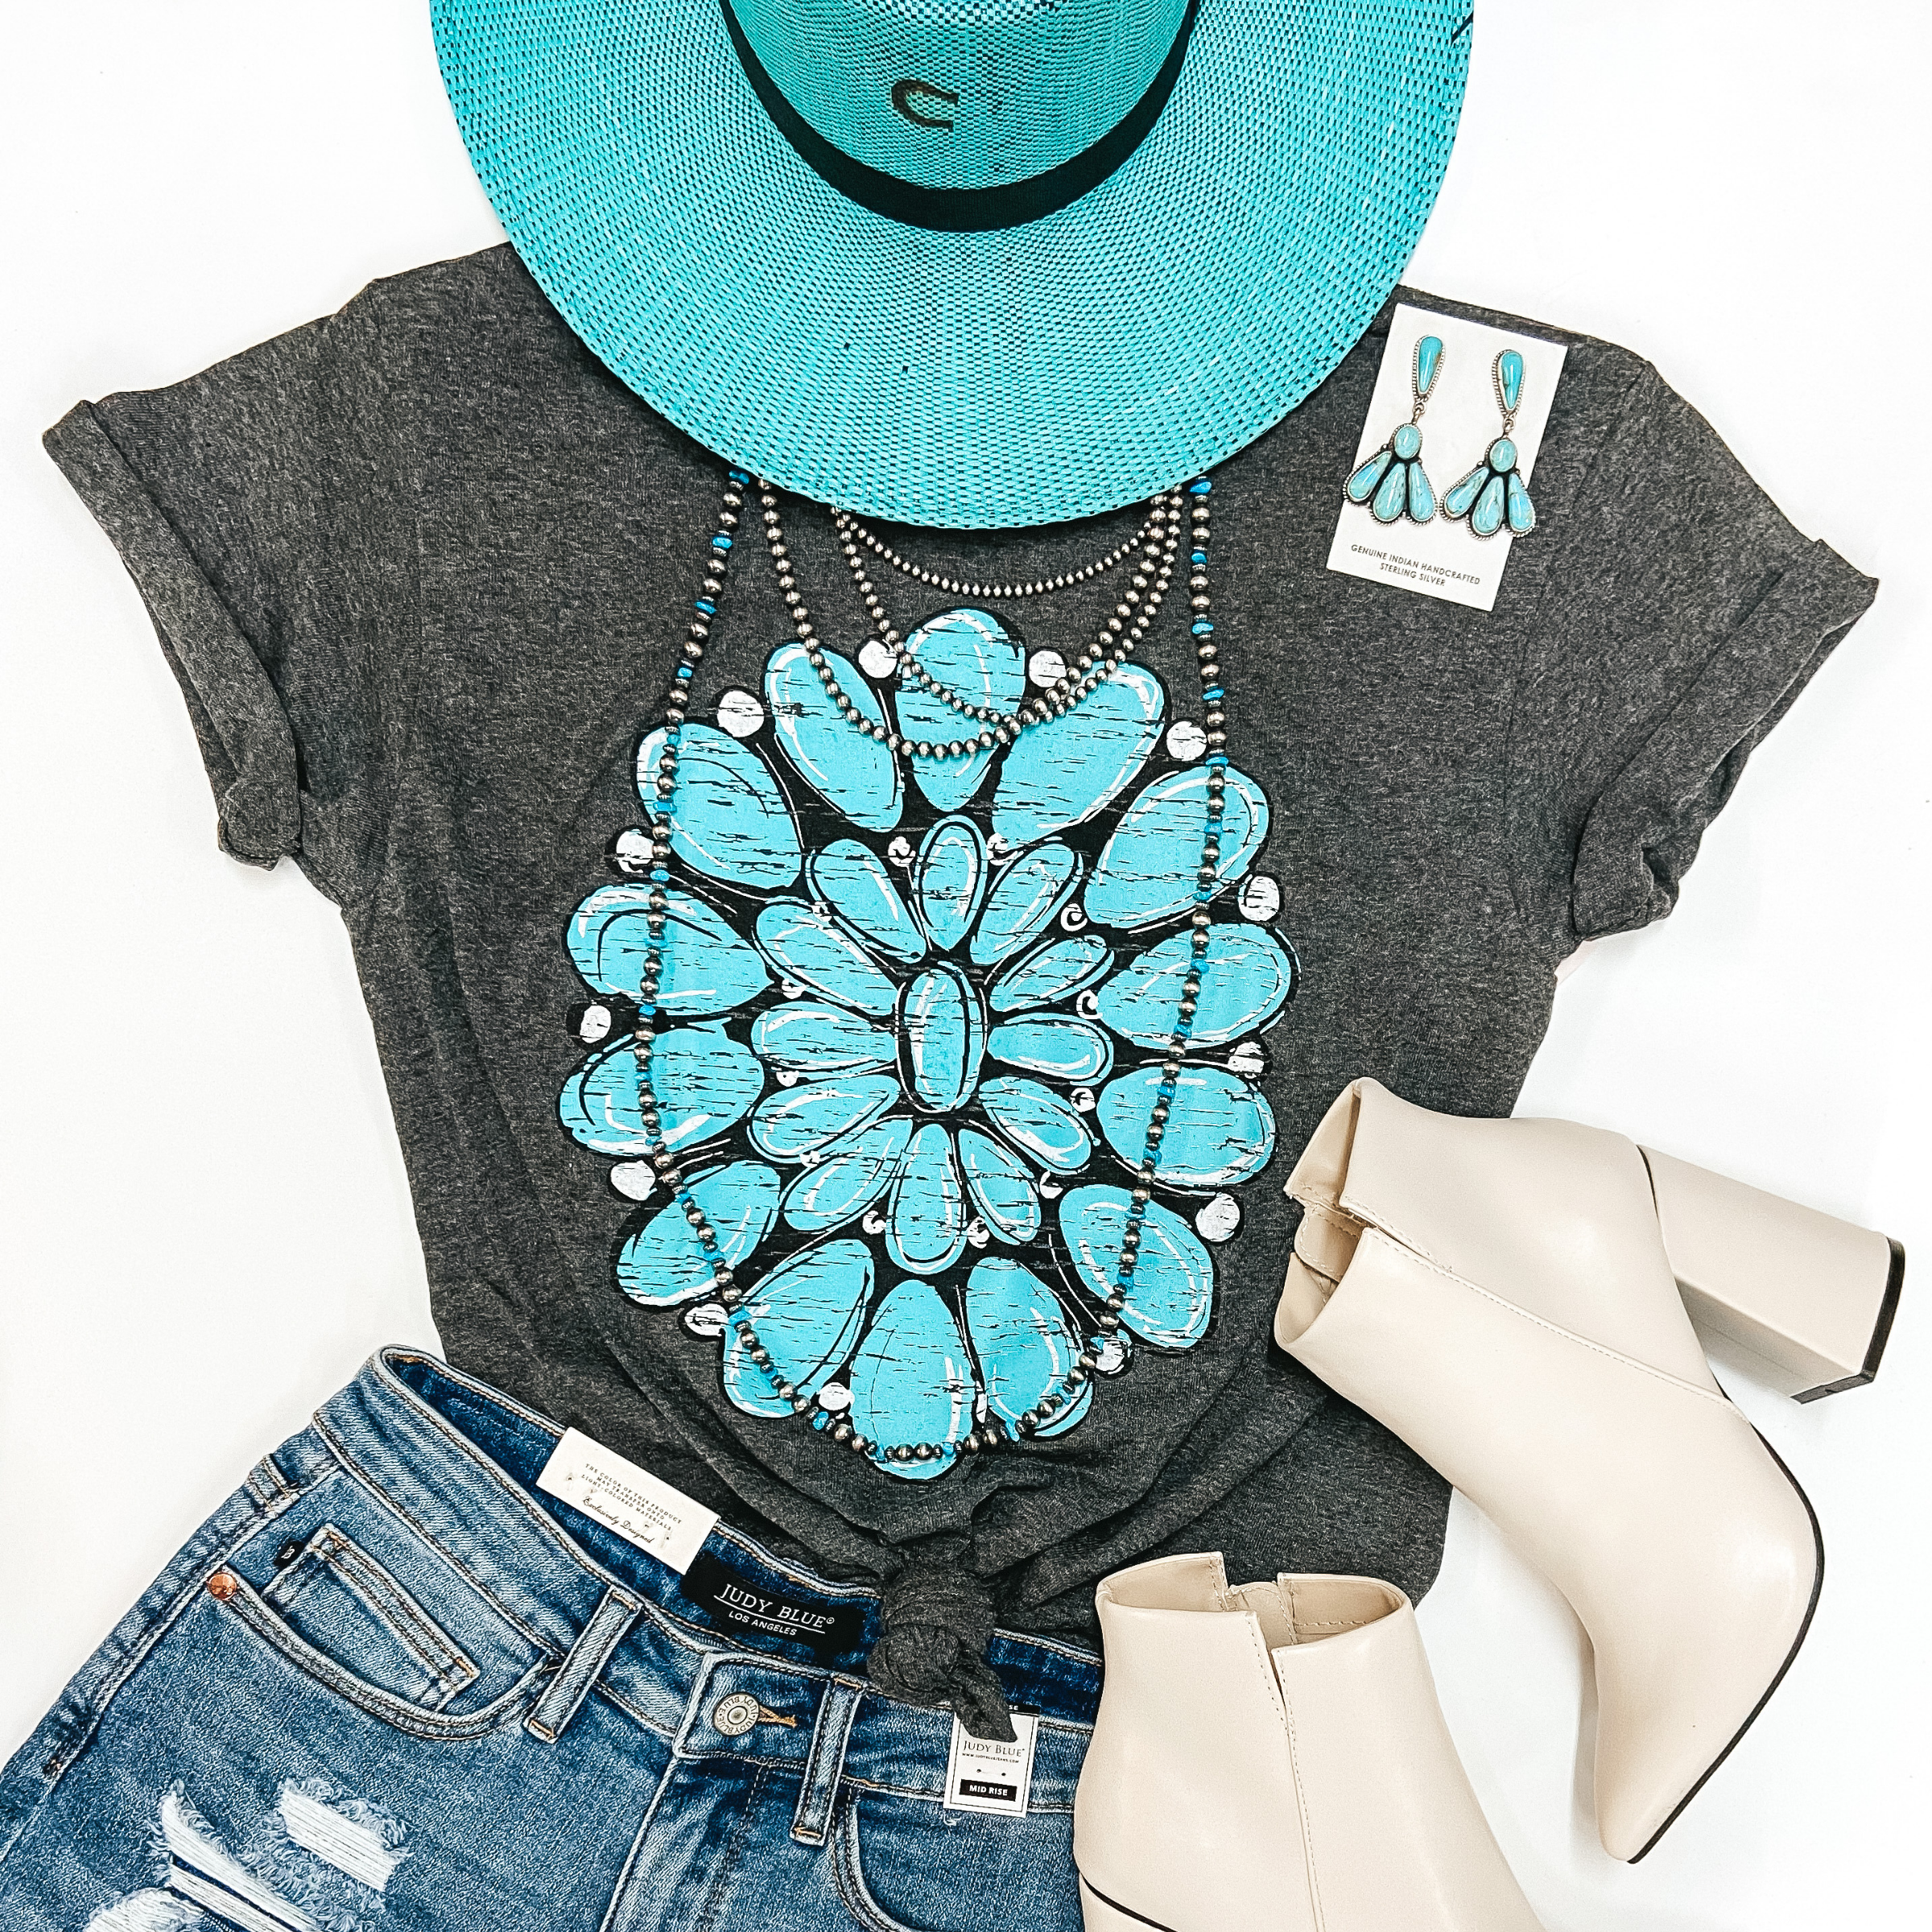 A charcoal grey tee shirt with cuffed sleeves and a knotted front. The tee shirt has a graphic of a turquoise cluster design. Tee shirt is pictured with denim shorts, silver and turquoise jewelry, ivory booties, and a turquoise straw hat.